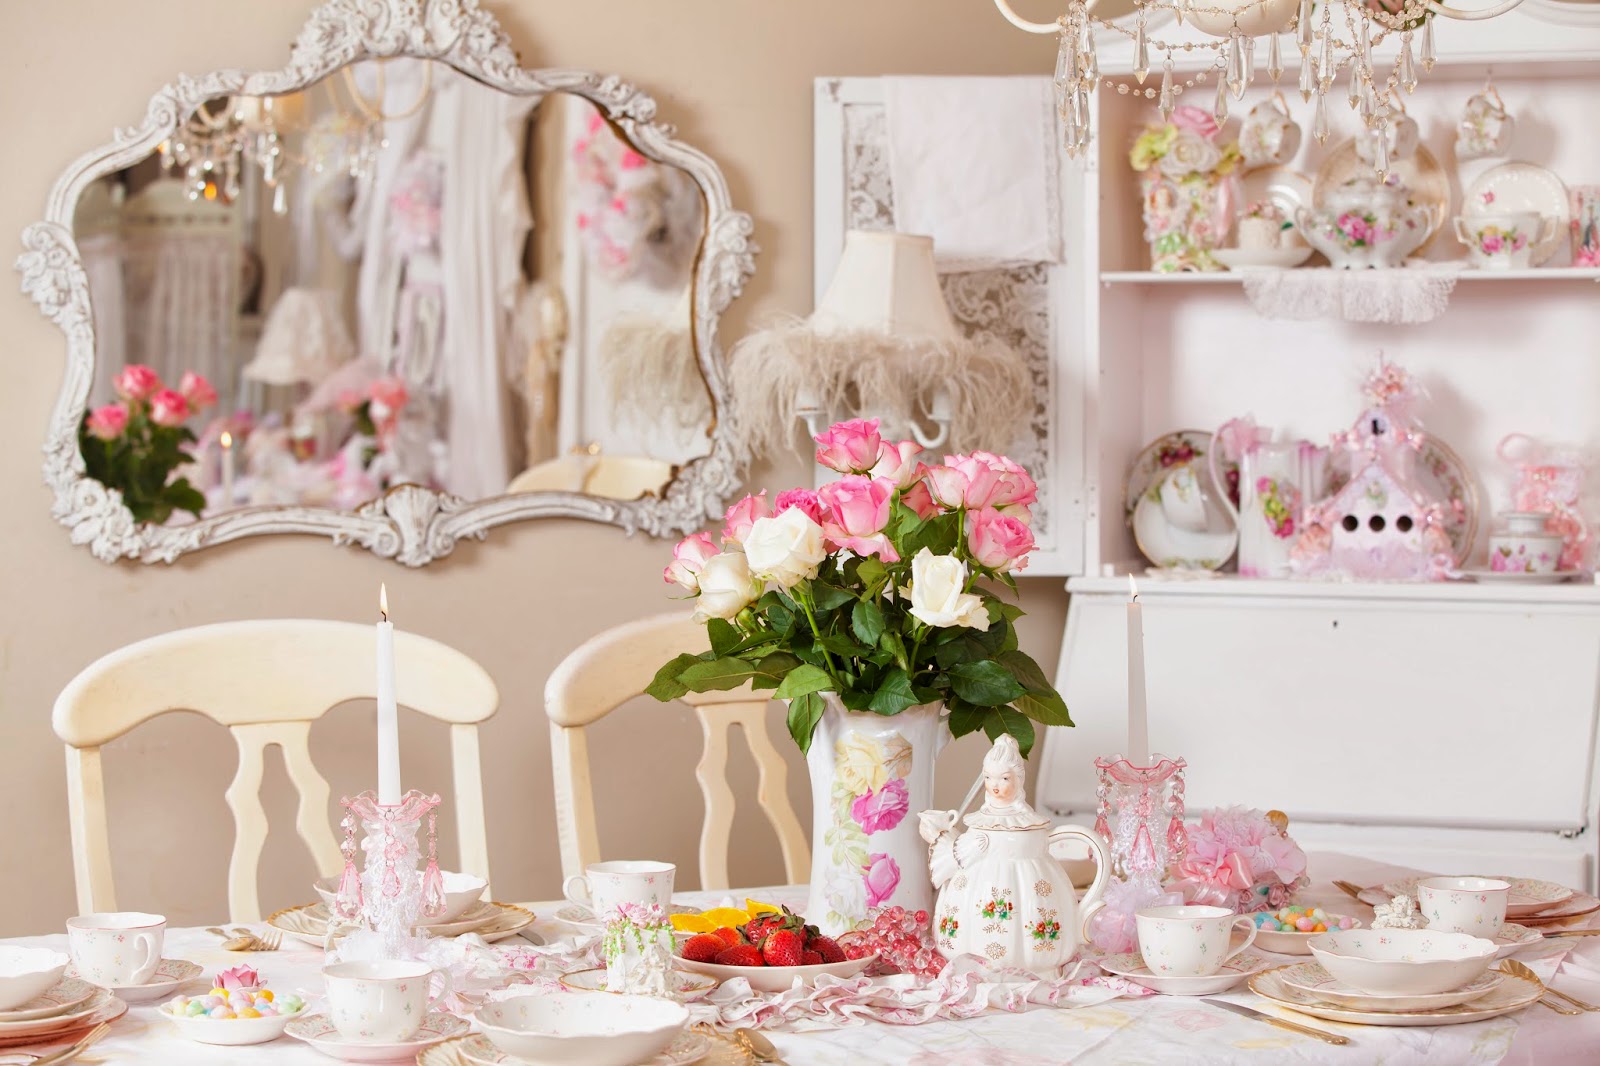 Shabby chic style tips for decorating your home